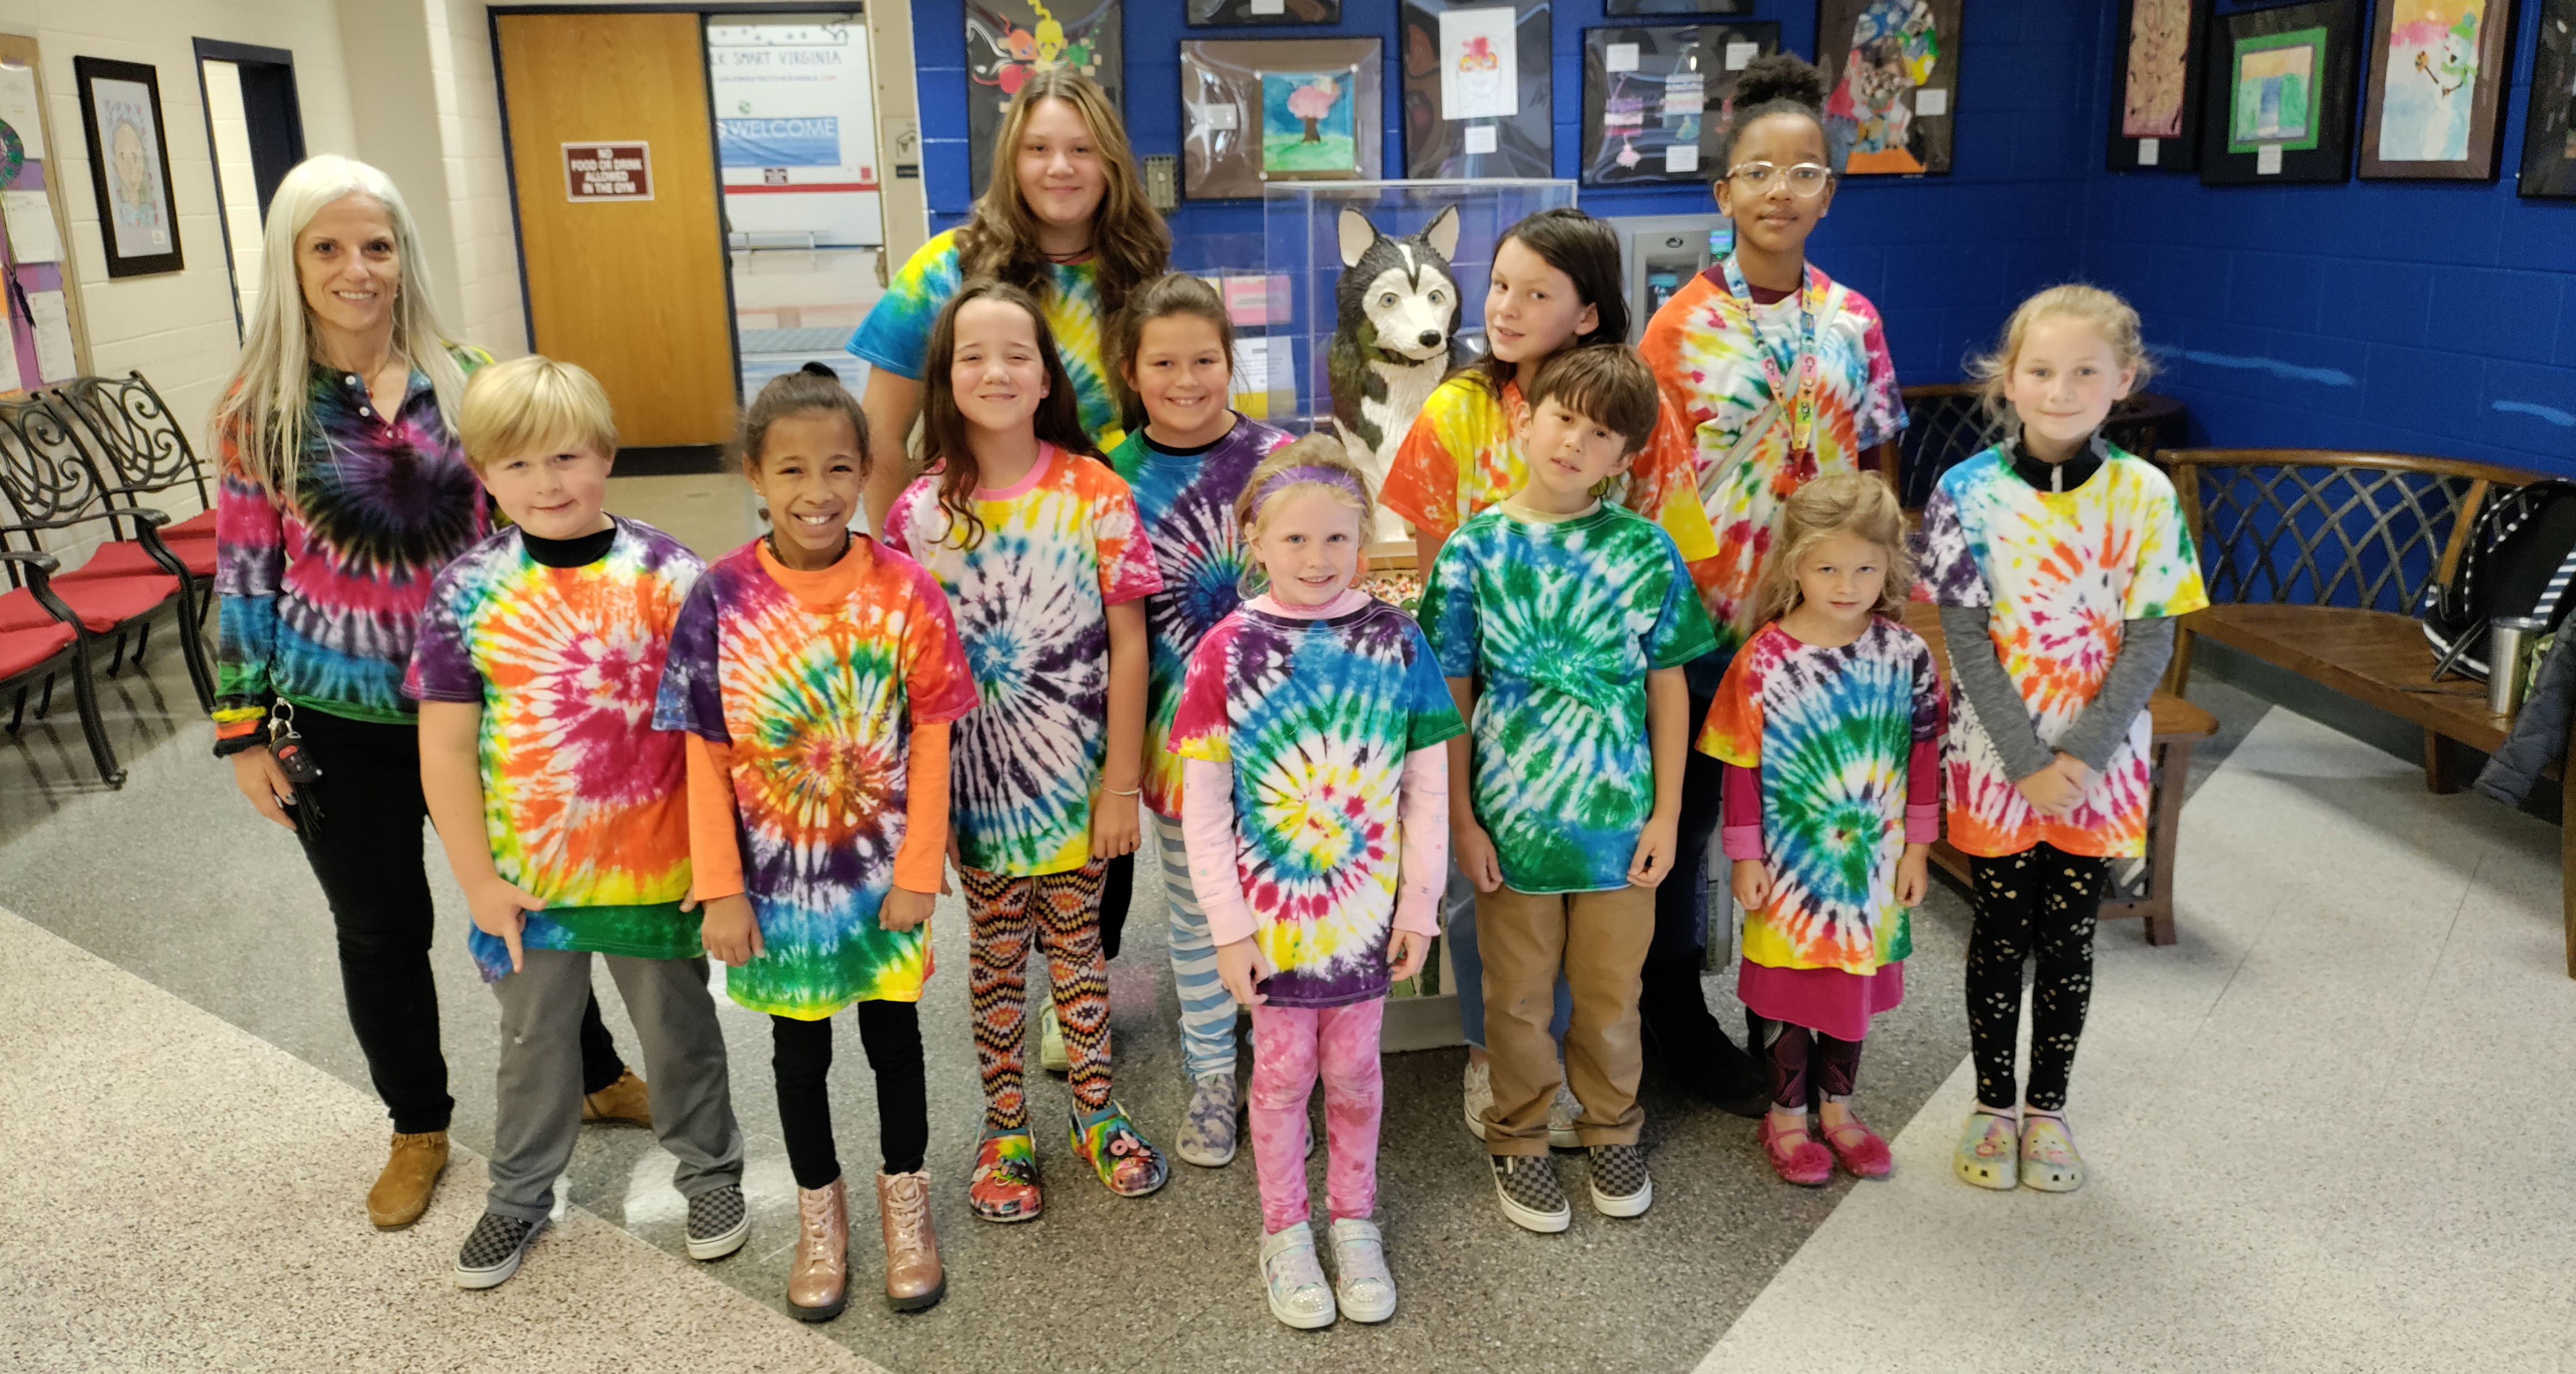 A large group of students and some staff wearing tie dye shirts